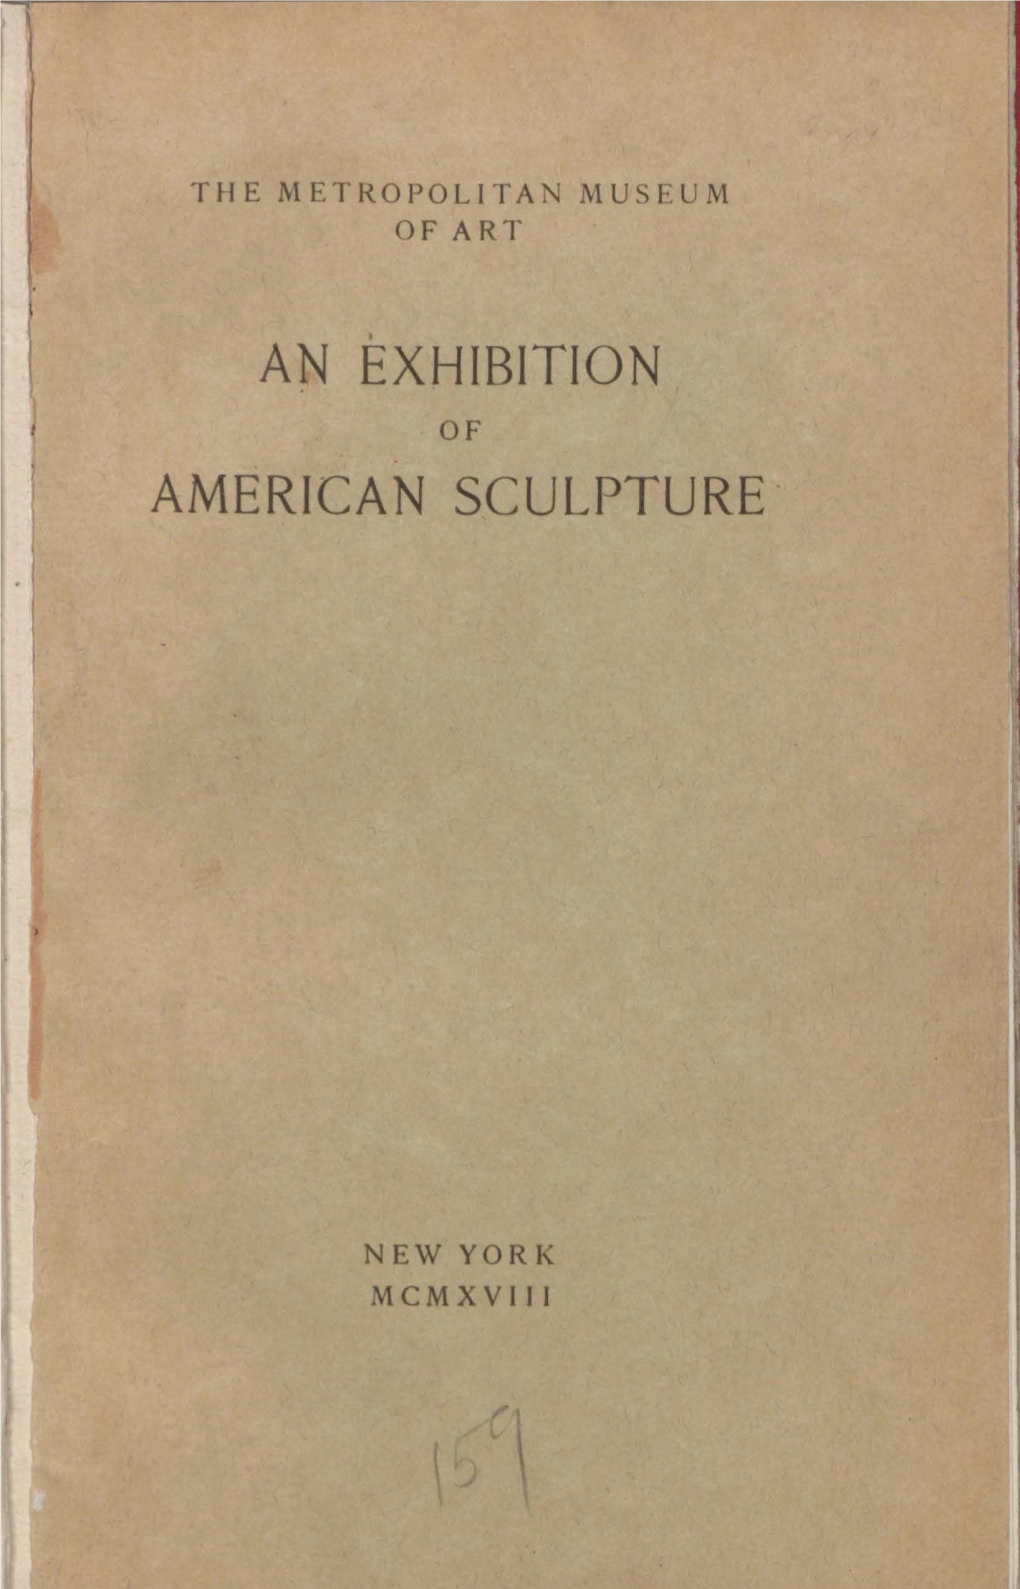 An Exhibition of American Sculpture